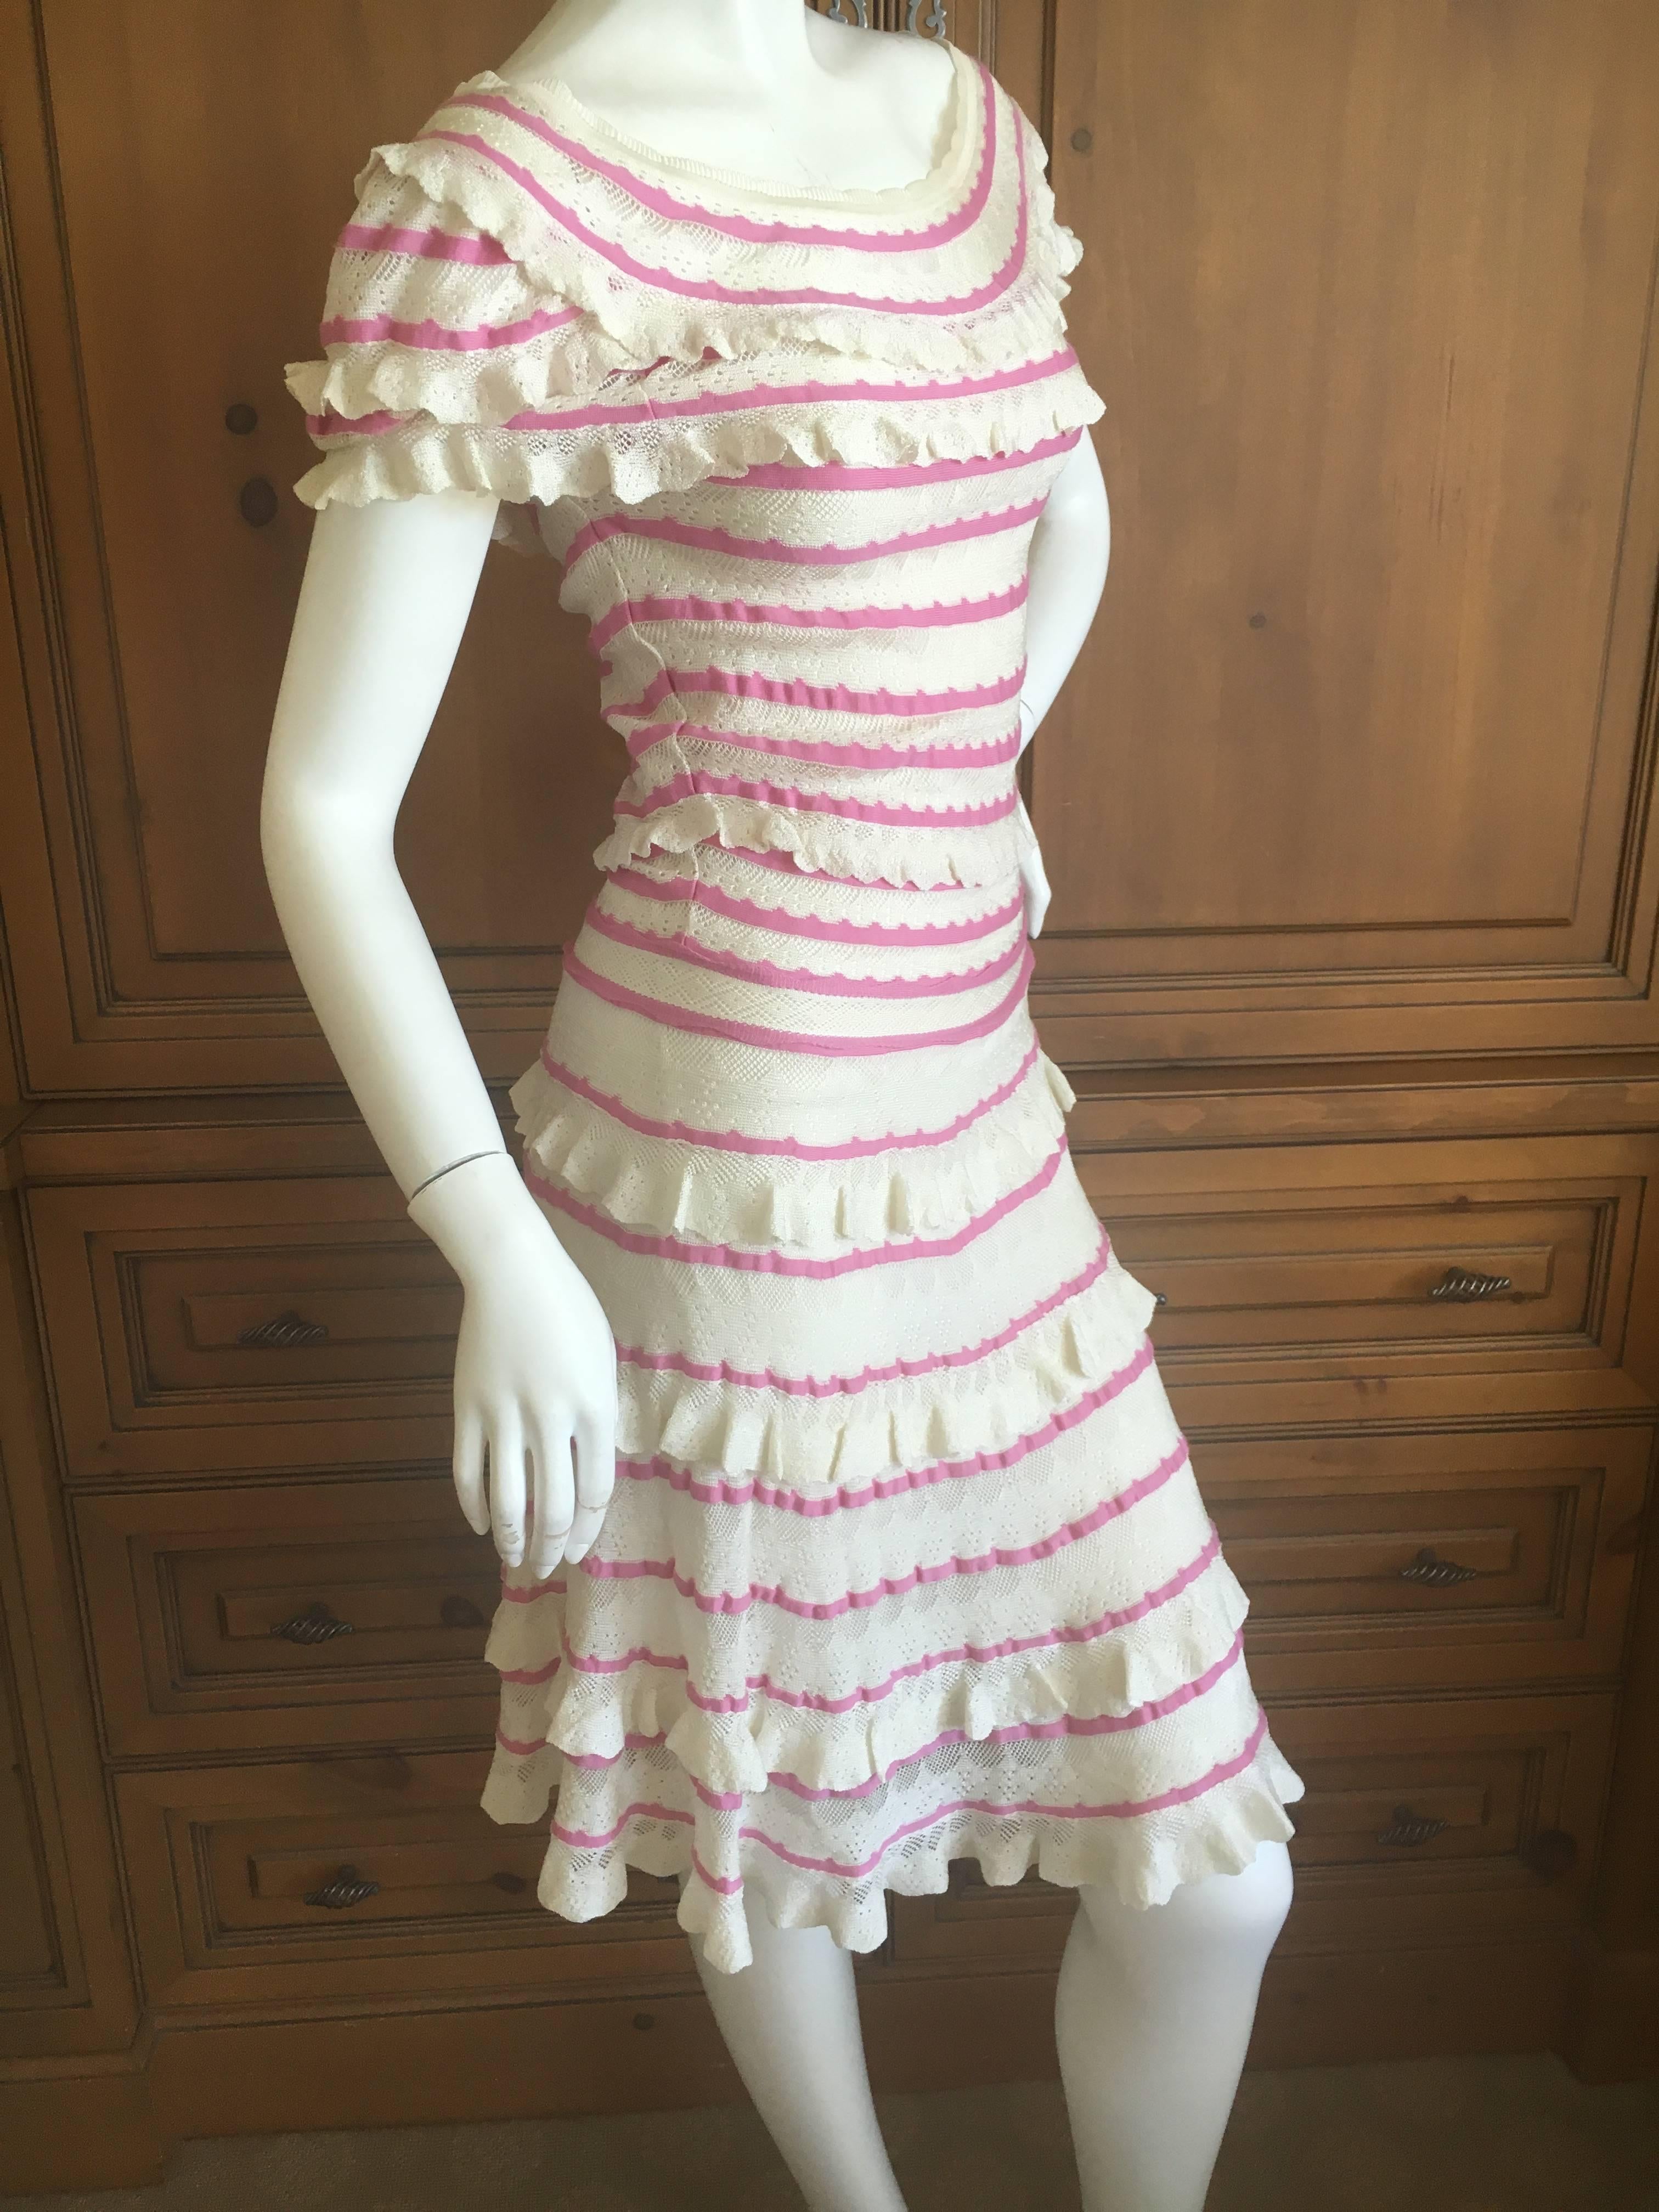 Christian Dior by John Galliano Romantic Ruffled Pink and Cream Knit Dress In Excellent Condition For Sale In Cloverdale, CA